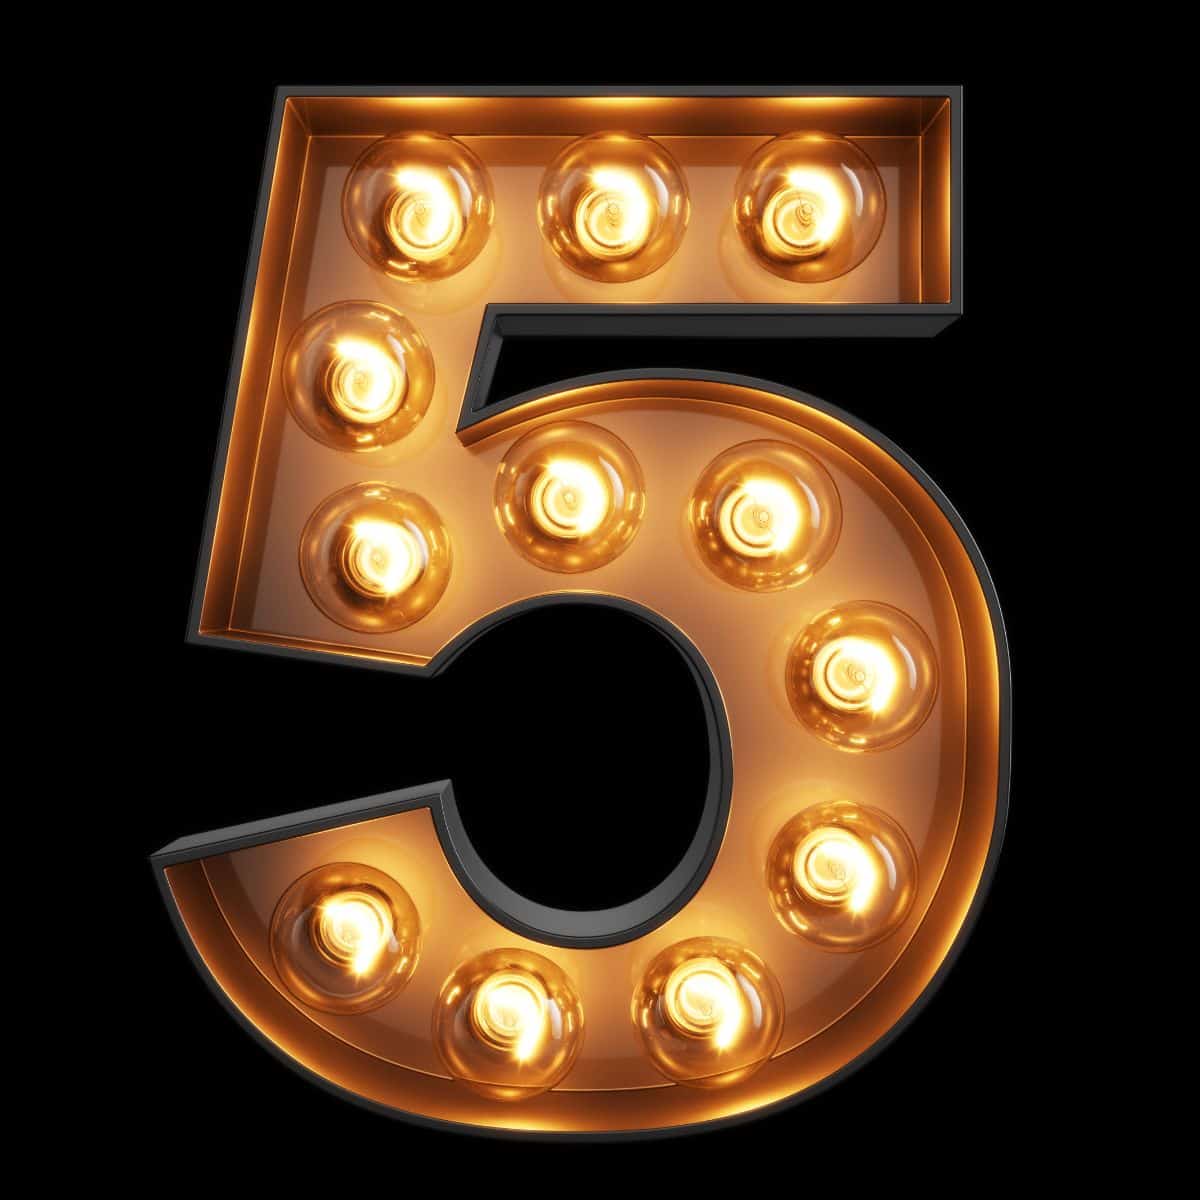 What is the spiritual meaning of the number 5